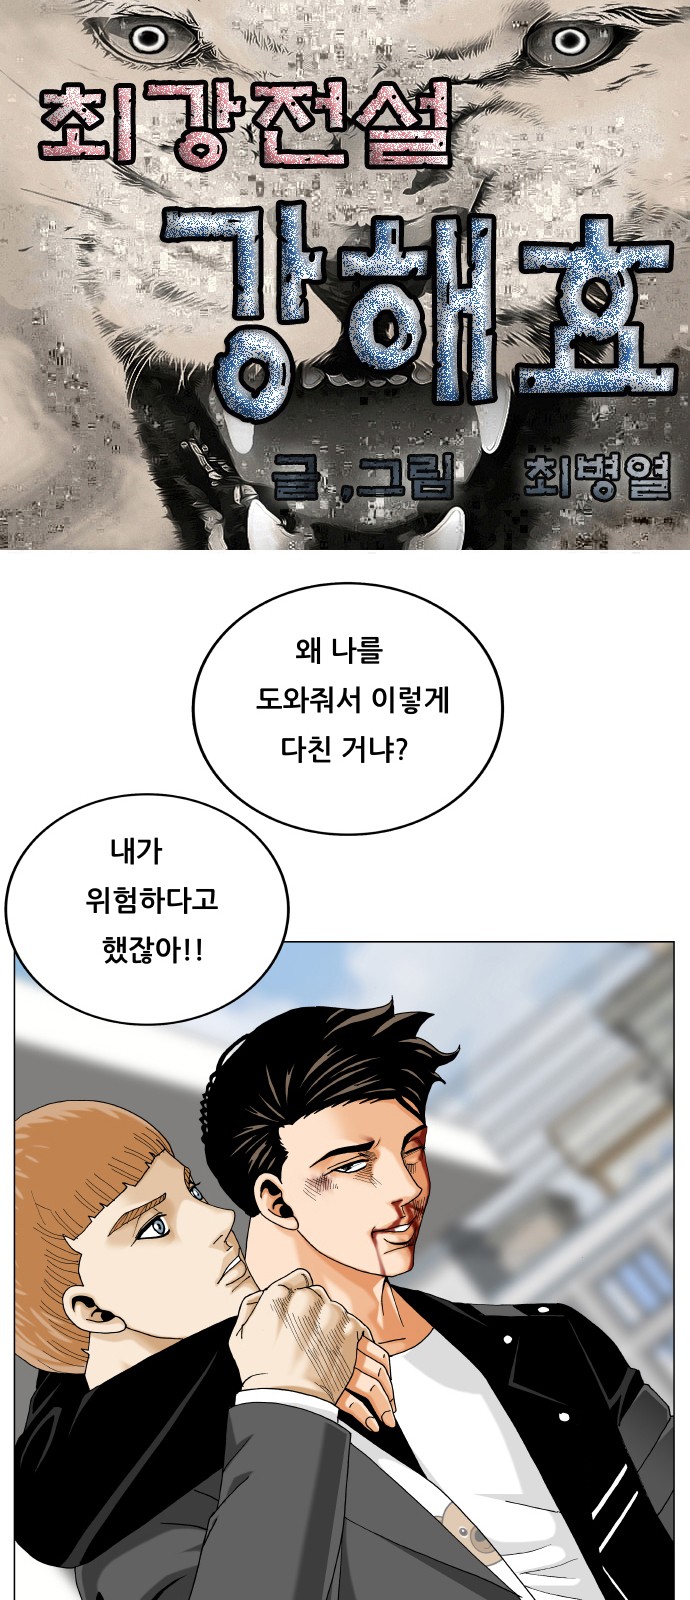 Ultimate Legend - Kang Hae Hyo - Chapter 445 - Page 1